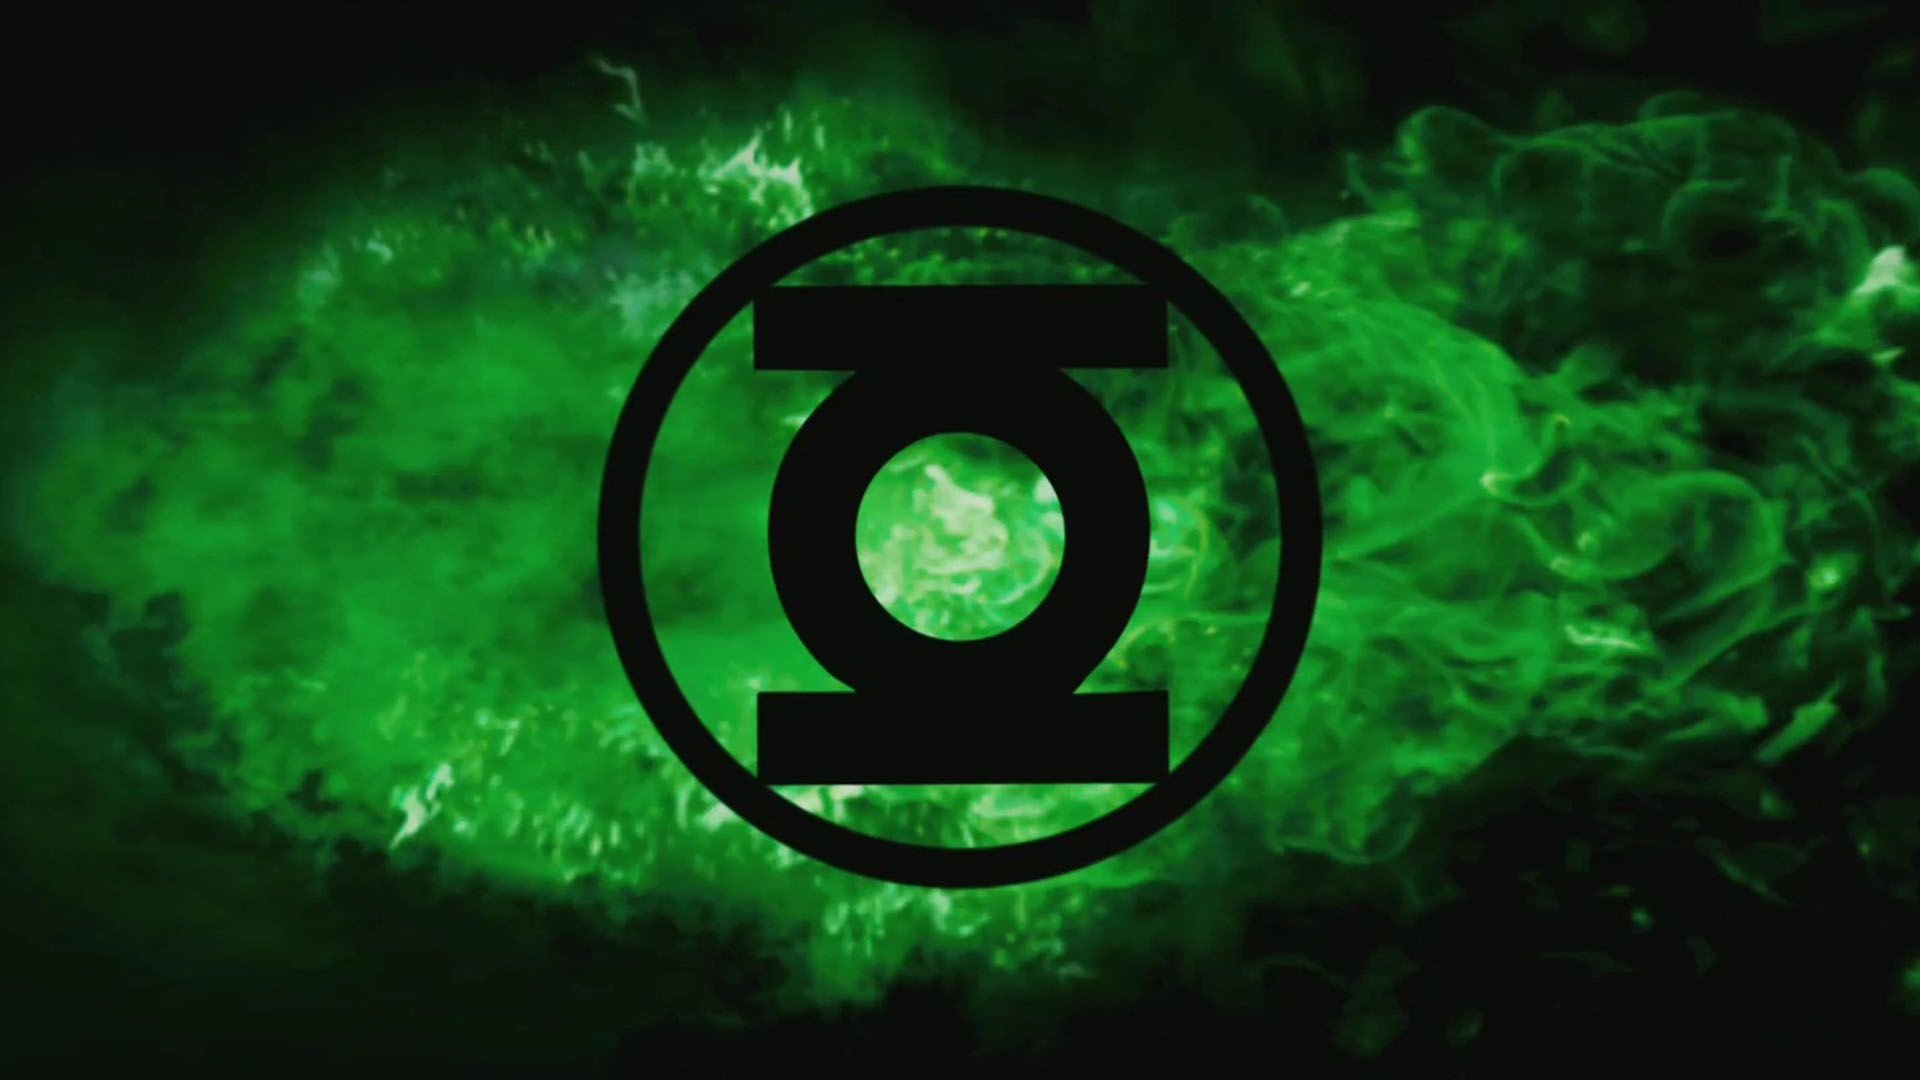 1920x1080 Green Lantern logo Cool Backgrounds Wallpapers 179 - HD Wallpapers .